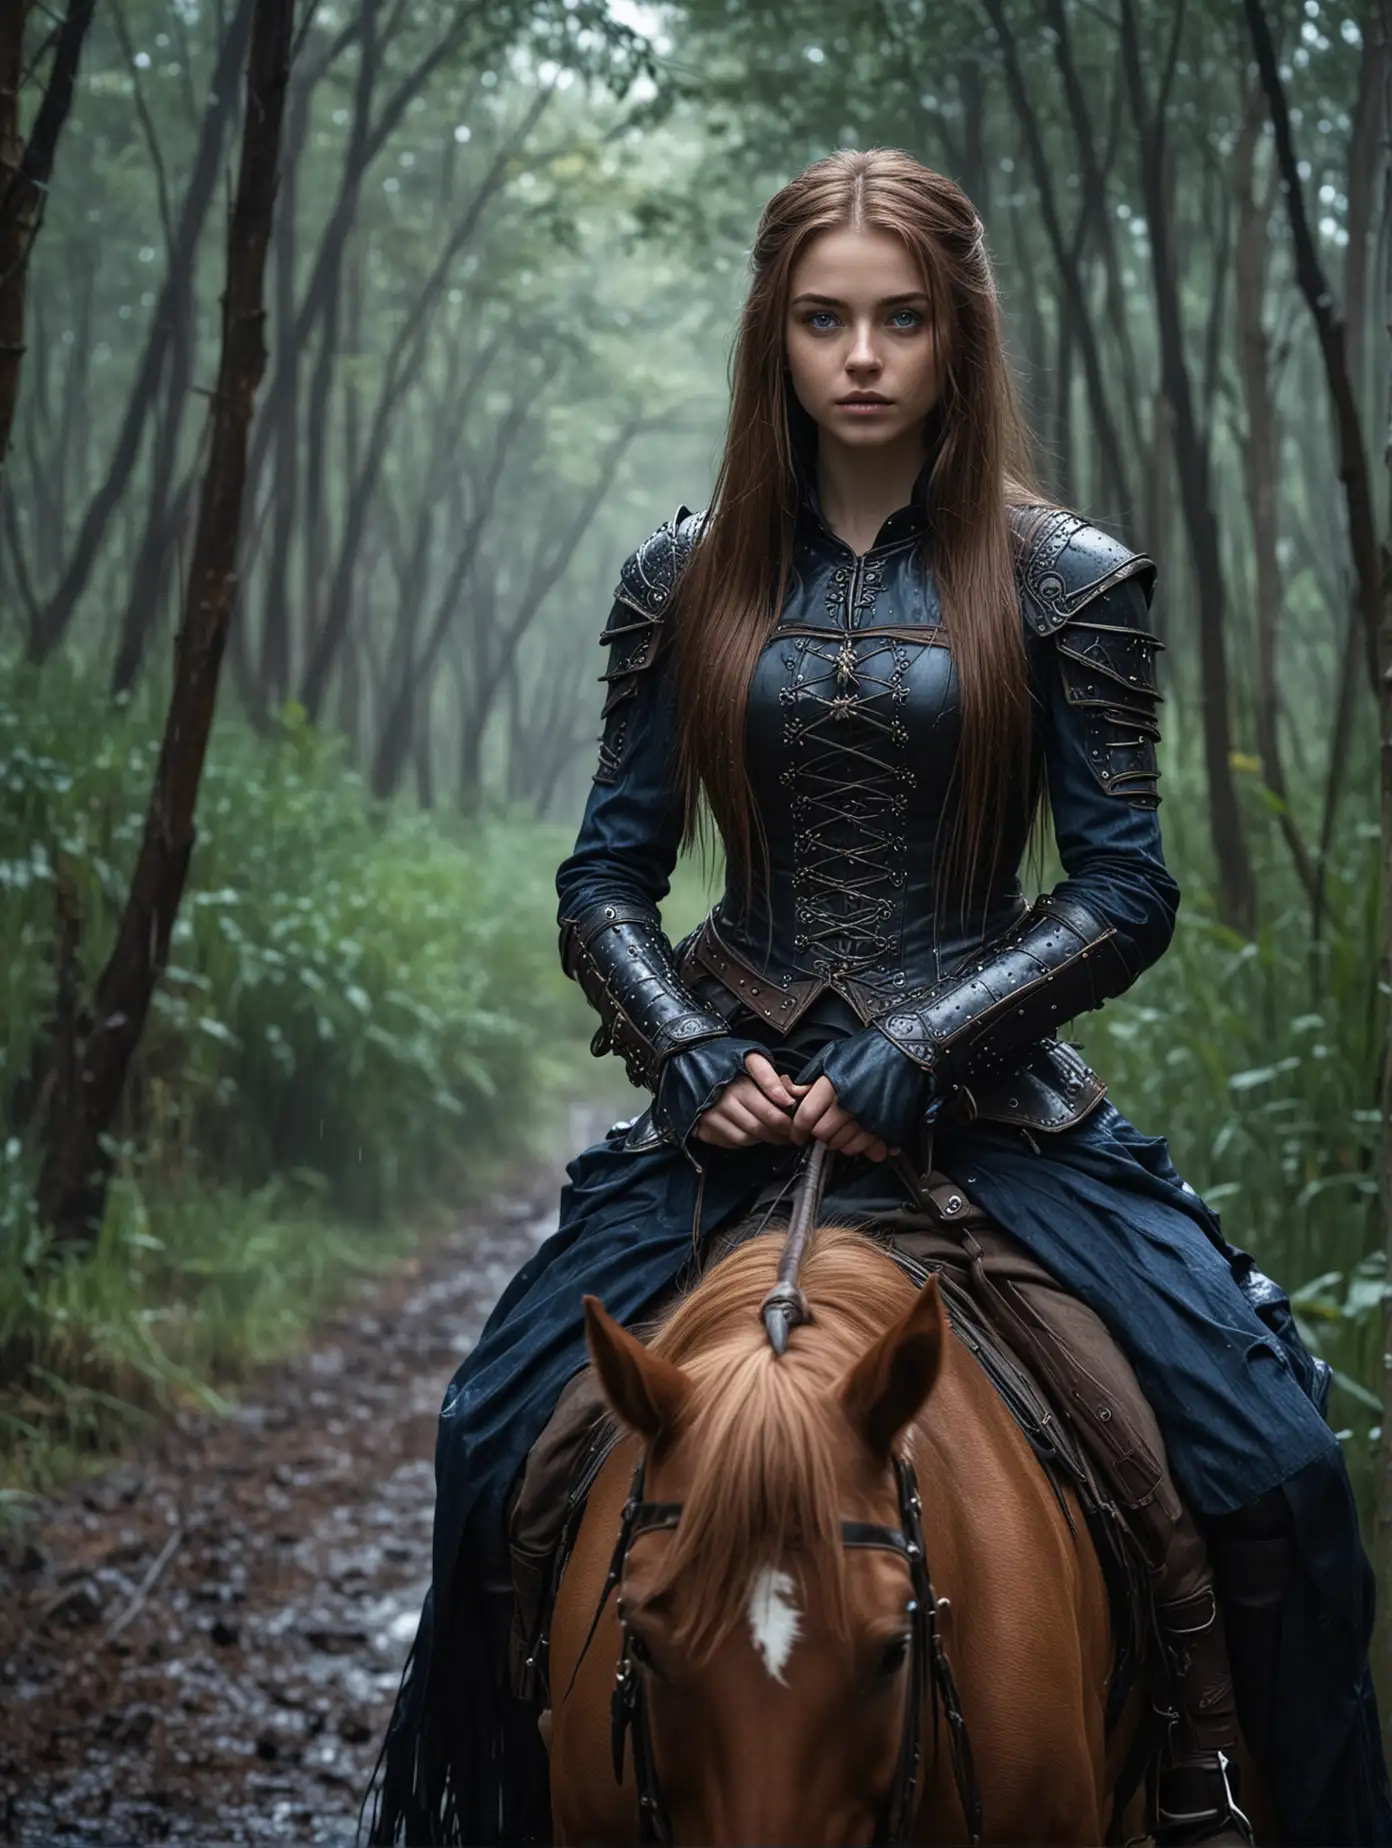 Gothic Warrioress Galloping in a Rainy Dense Forest